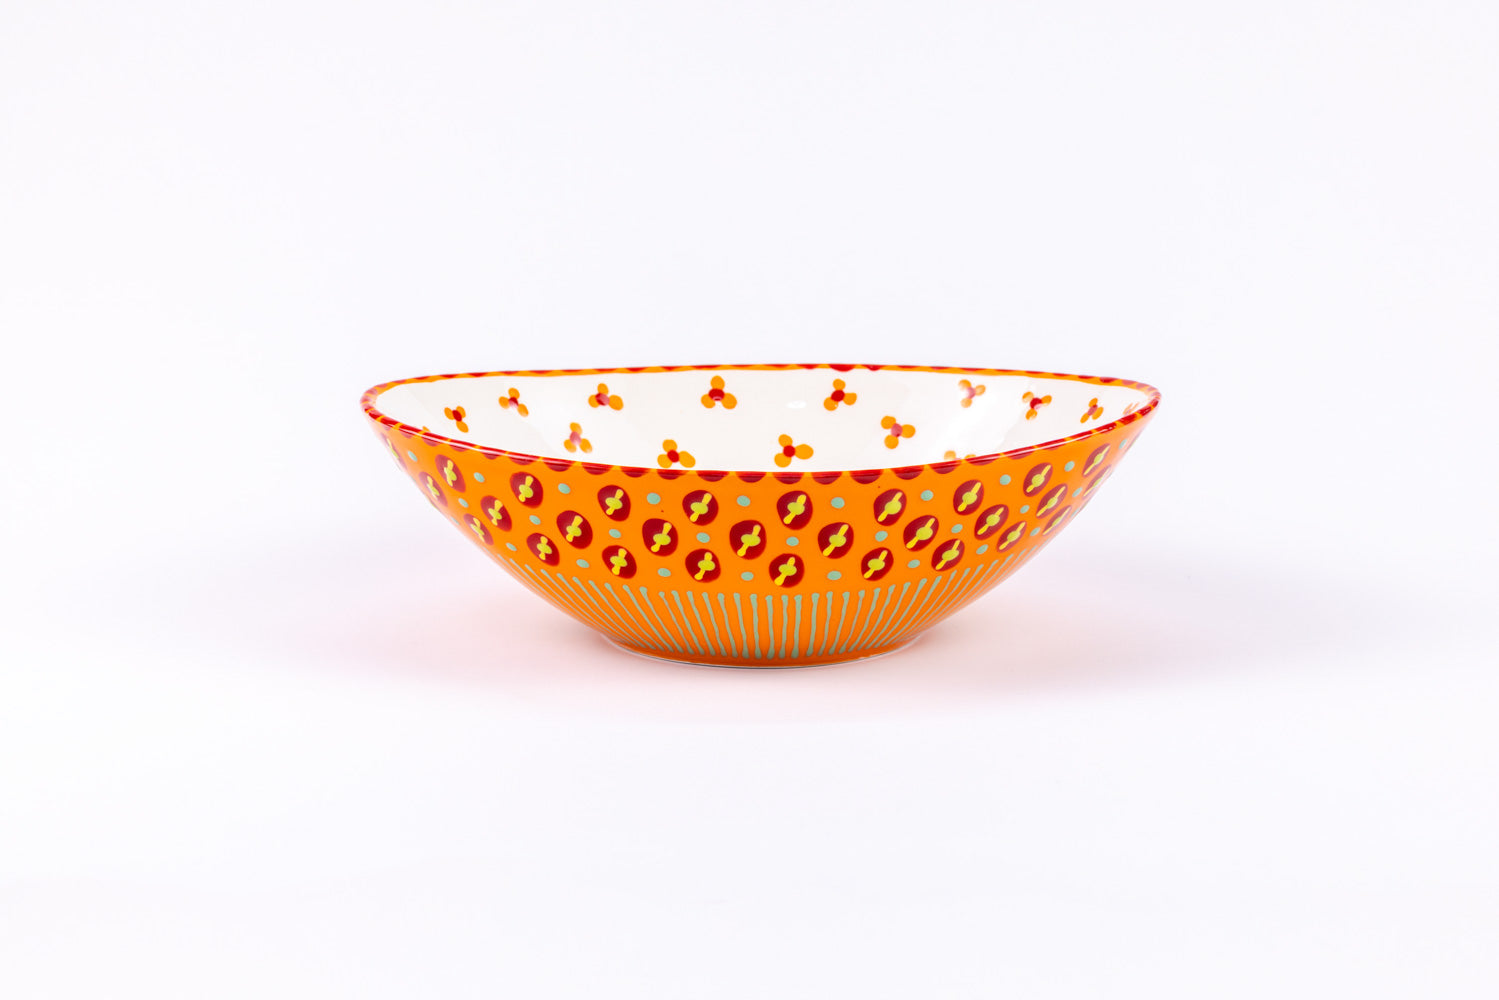 Oval ceramic serving bowl with orange base color. Red, yellow, and green dots & stripes on top. Inside is white with orange & red 'dot' flowers. Very fun and fairly traded.!